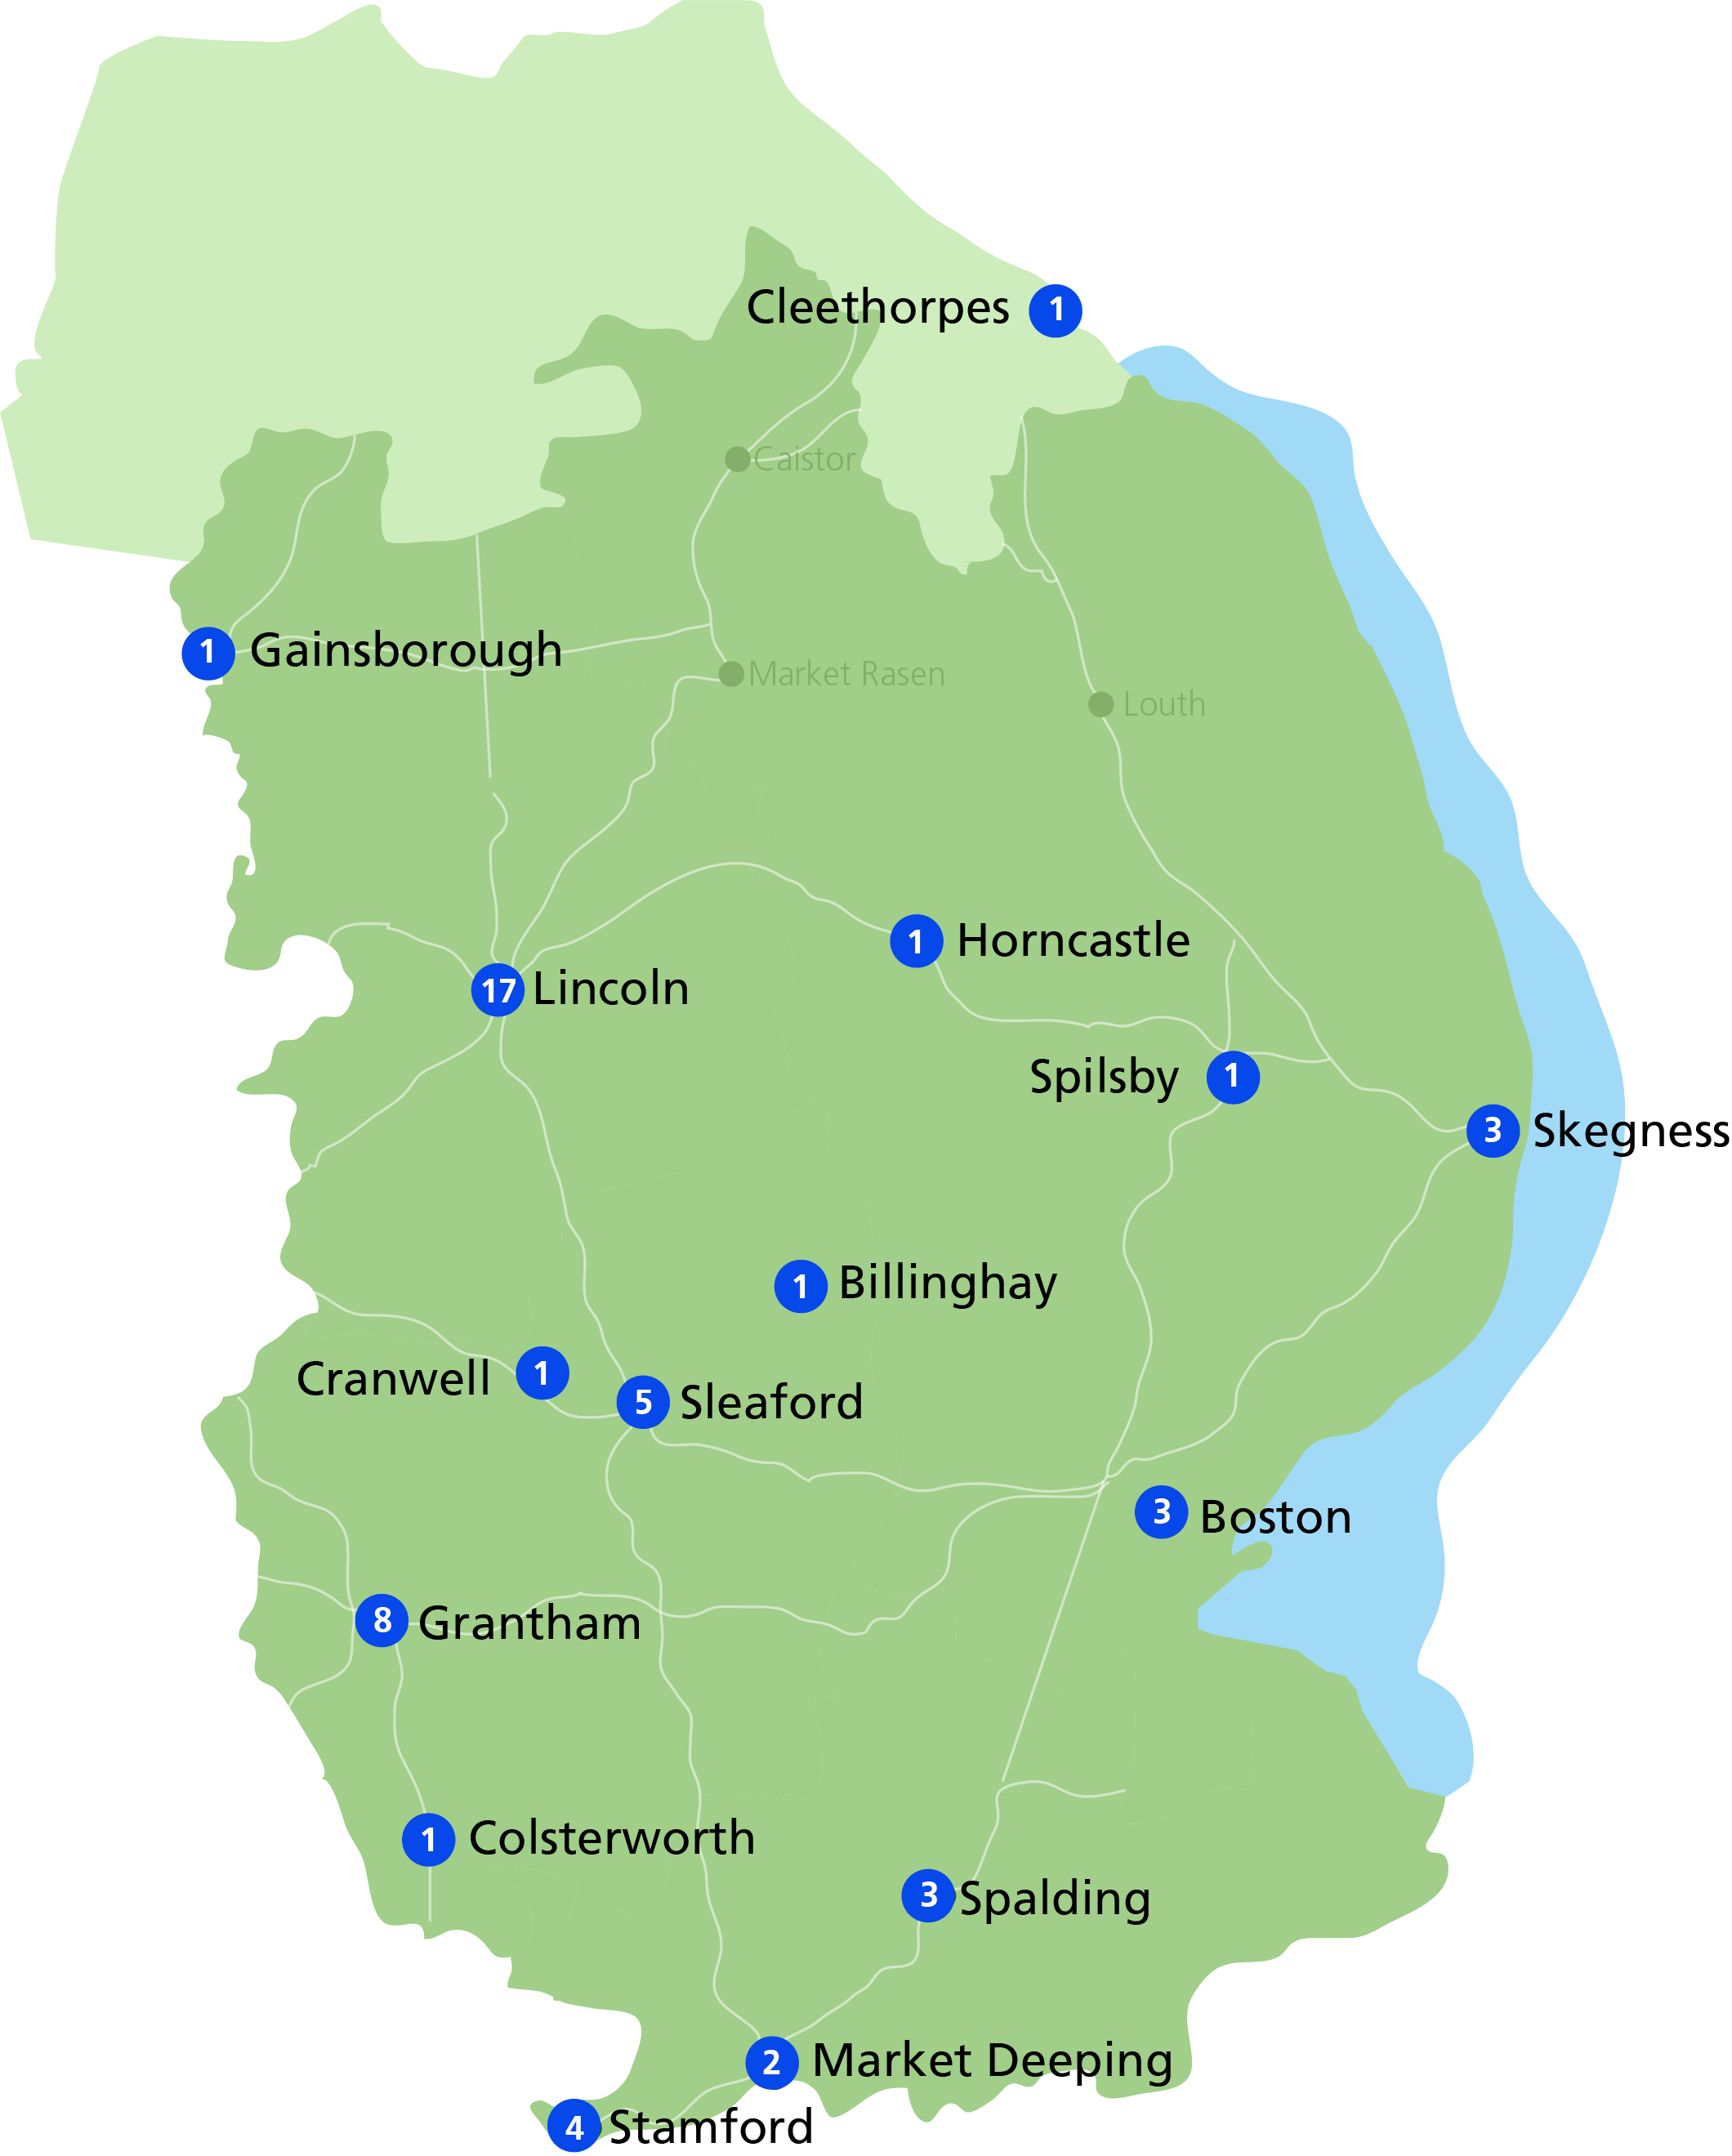 Number of patients who have travelled from different parts of the county to Ashley House in three years prior to closure